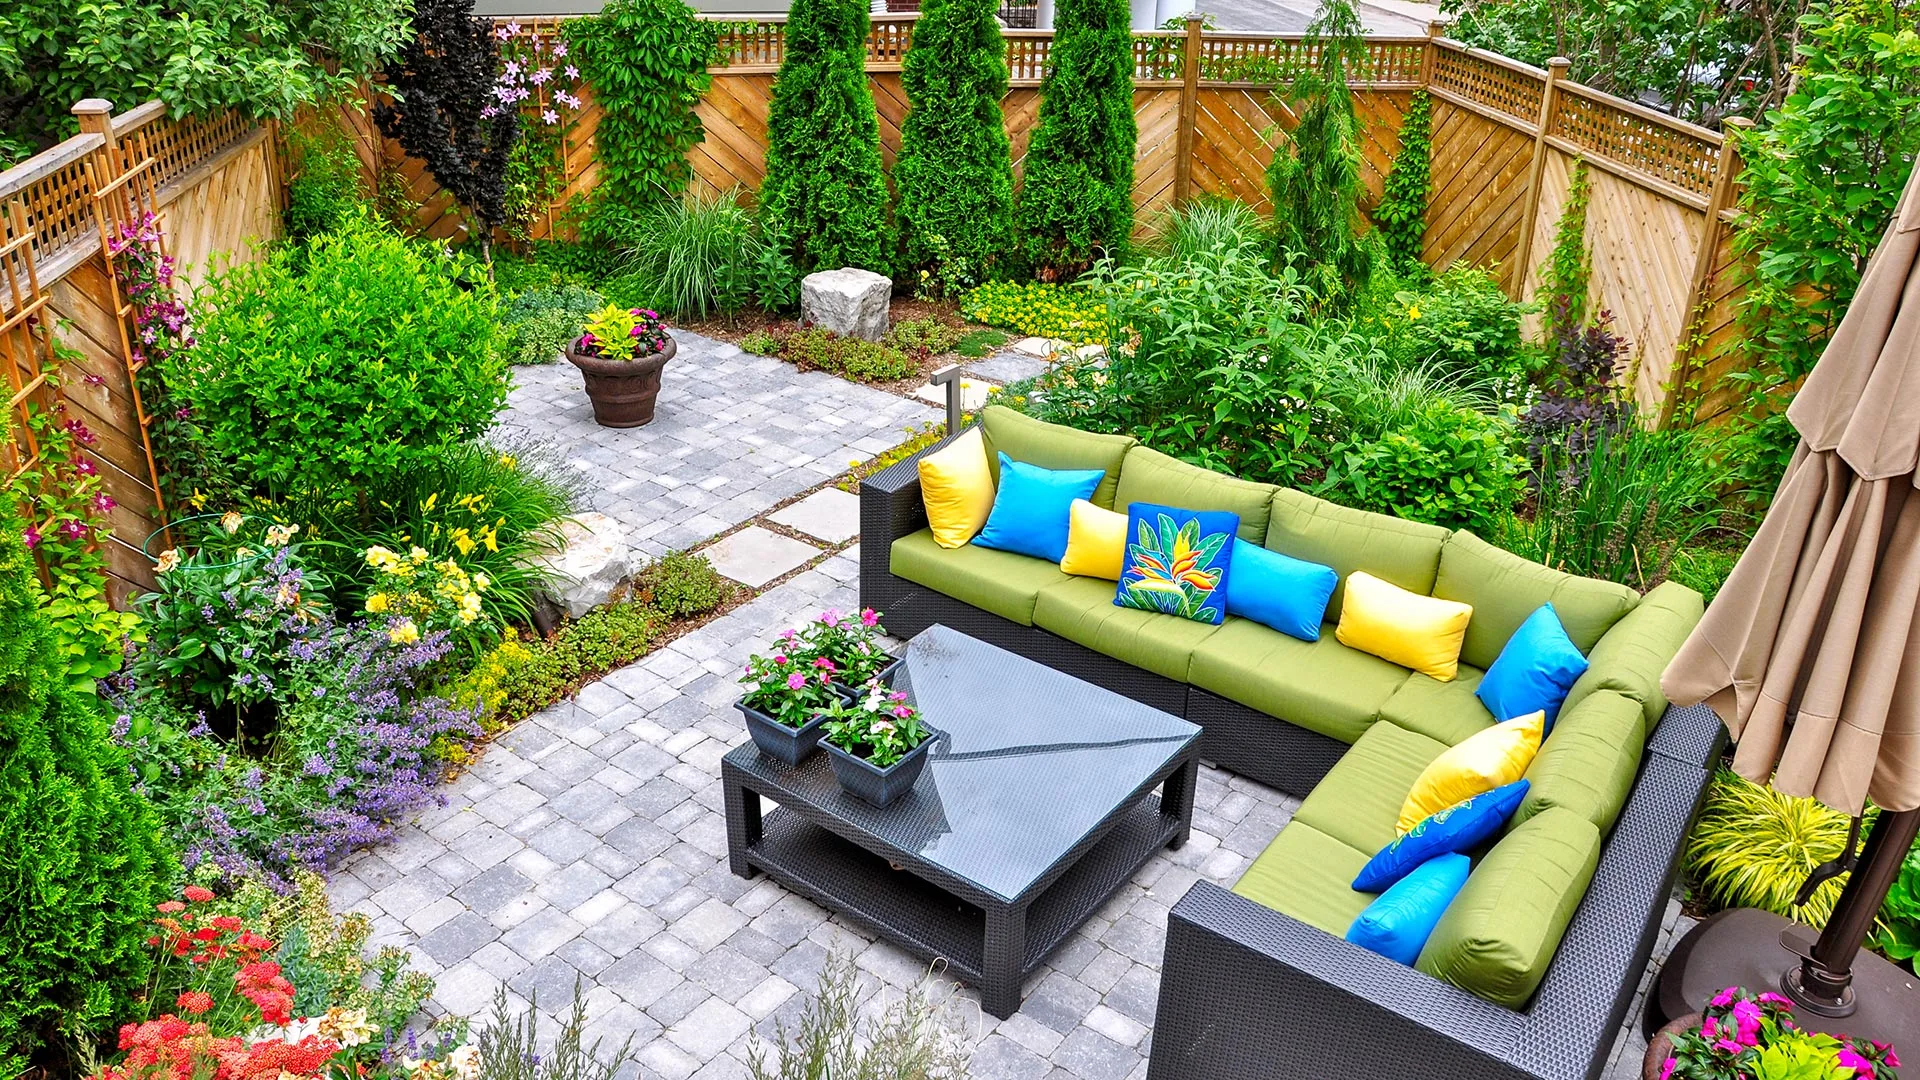 Patio Planning 101 - What to Know Before You Start